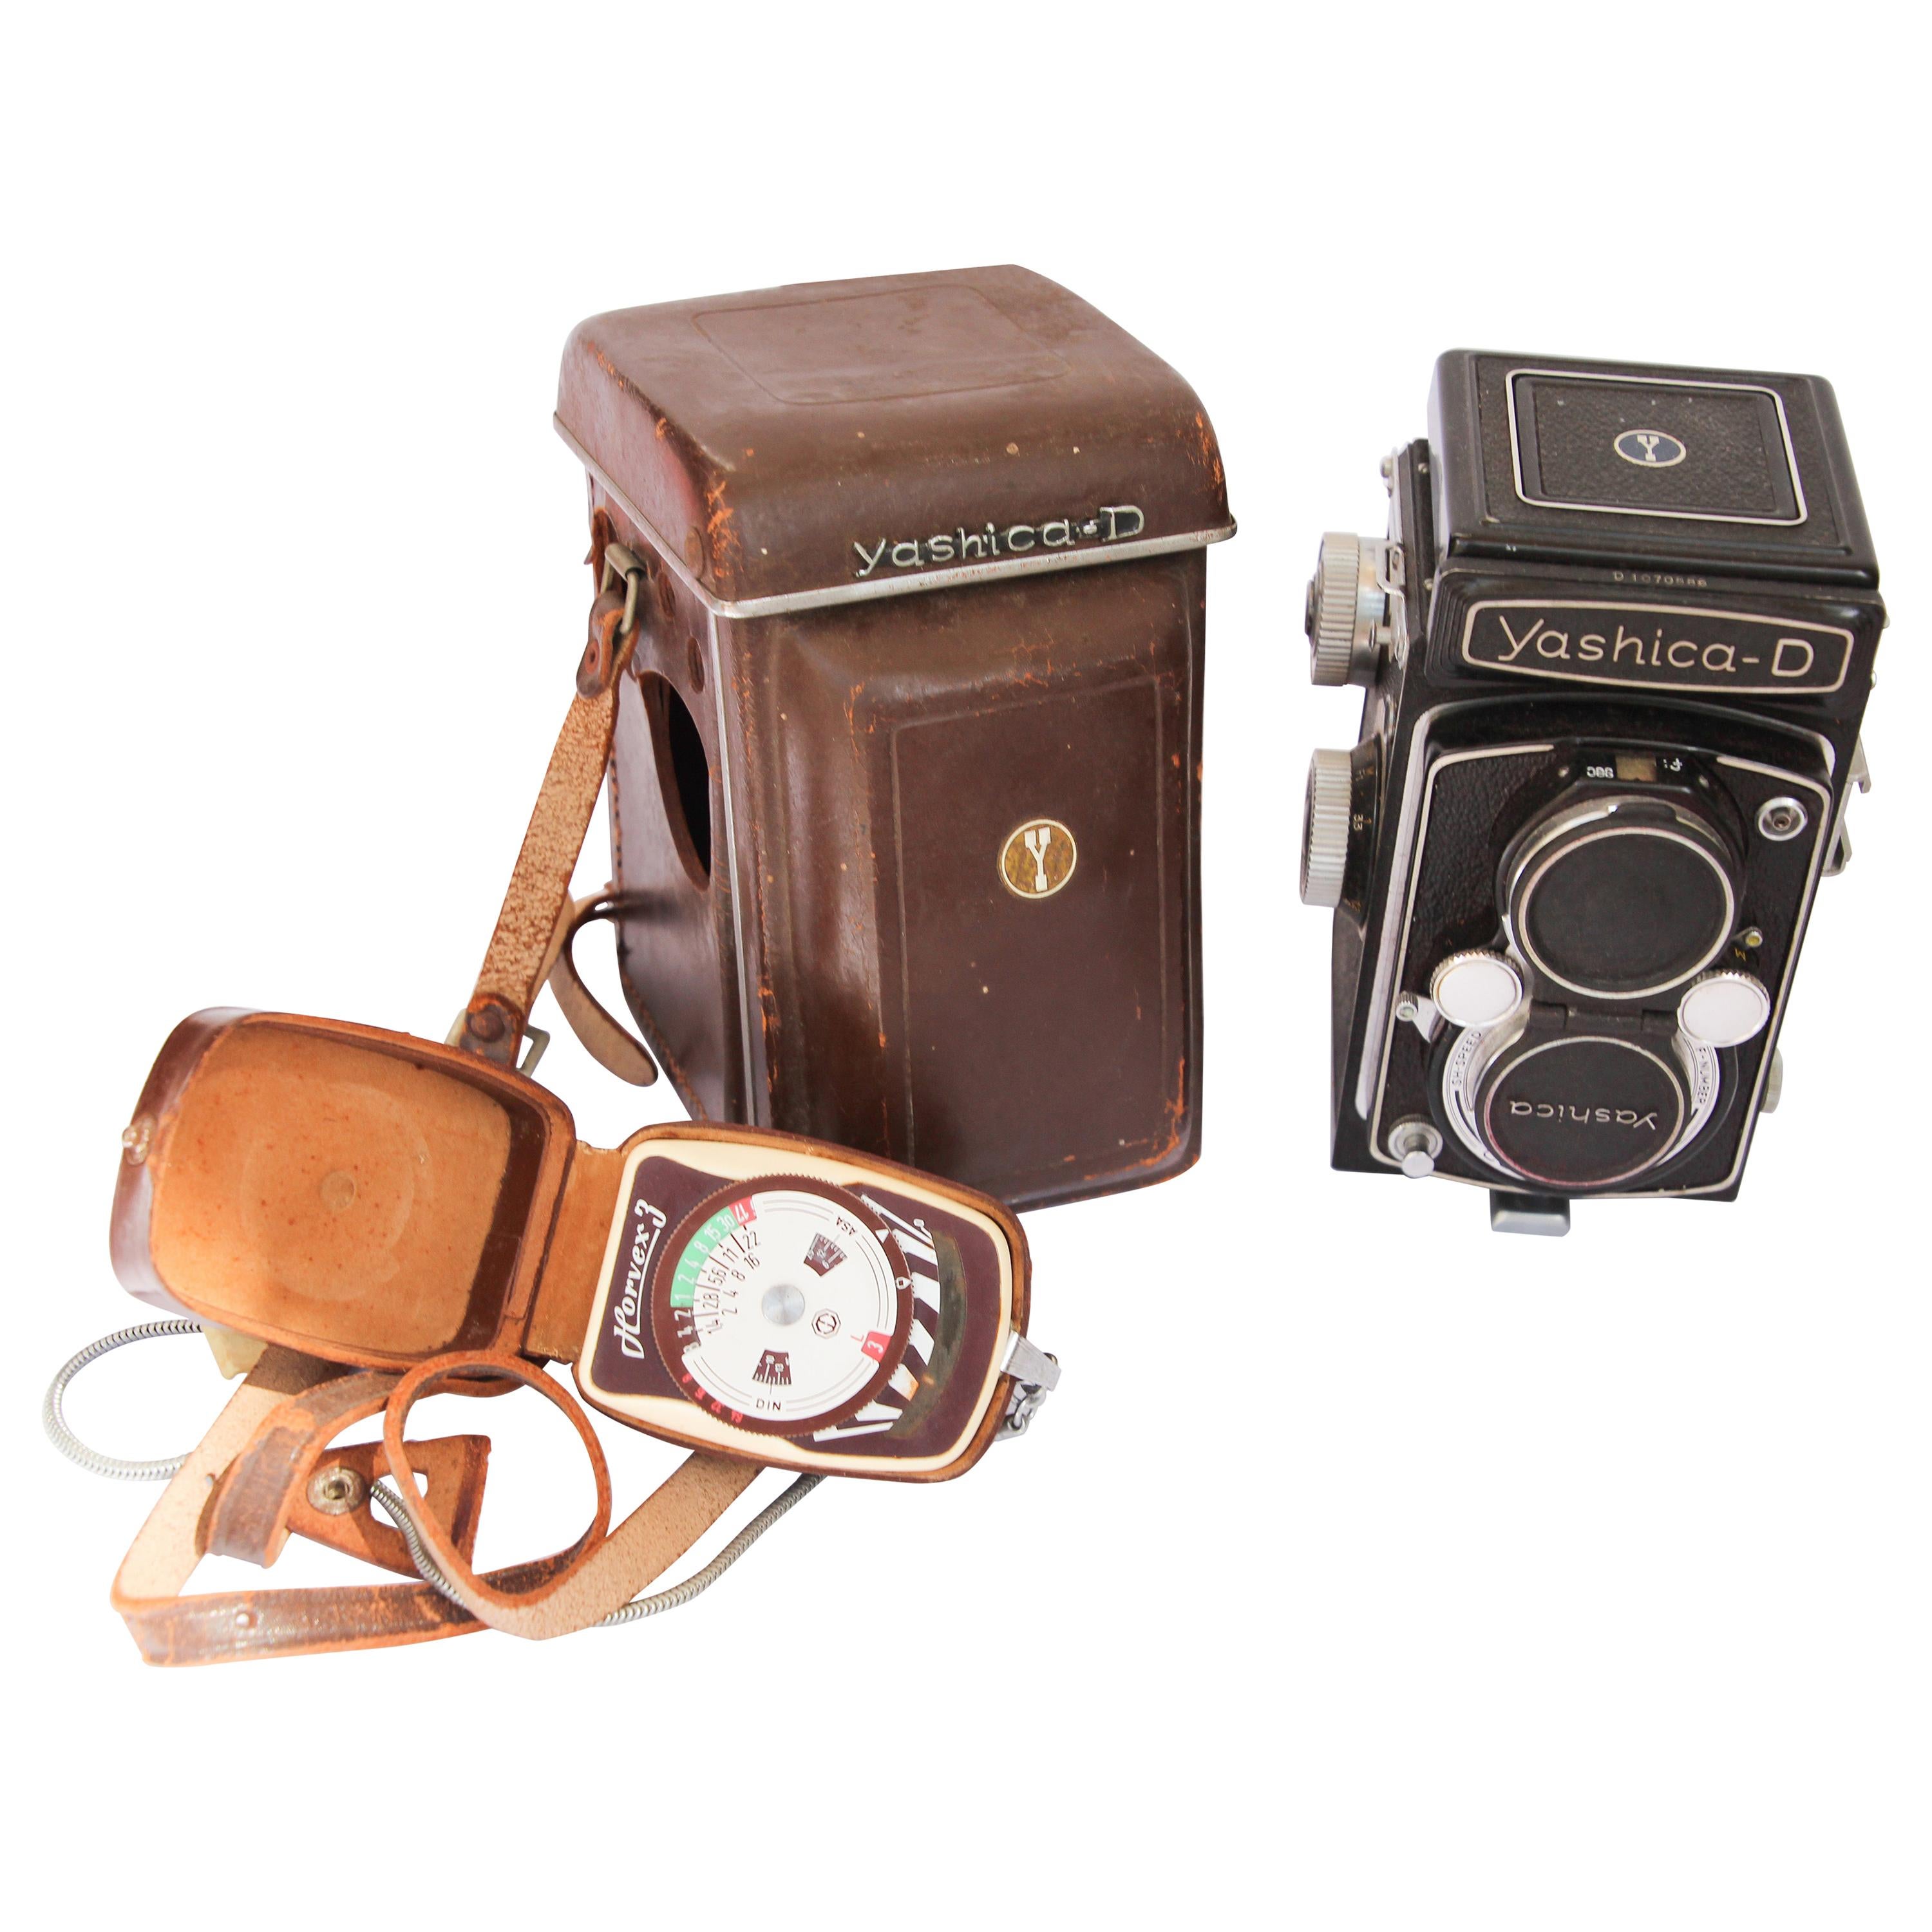 Yashica-D Camera with Case and Accessories, circa 1958